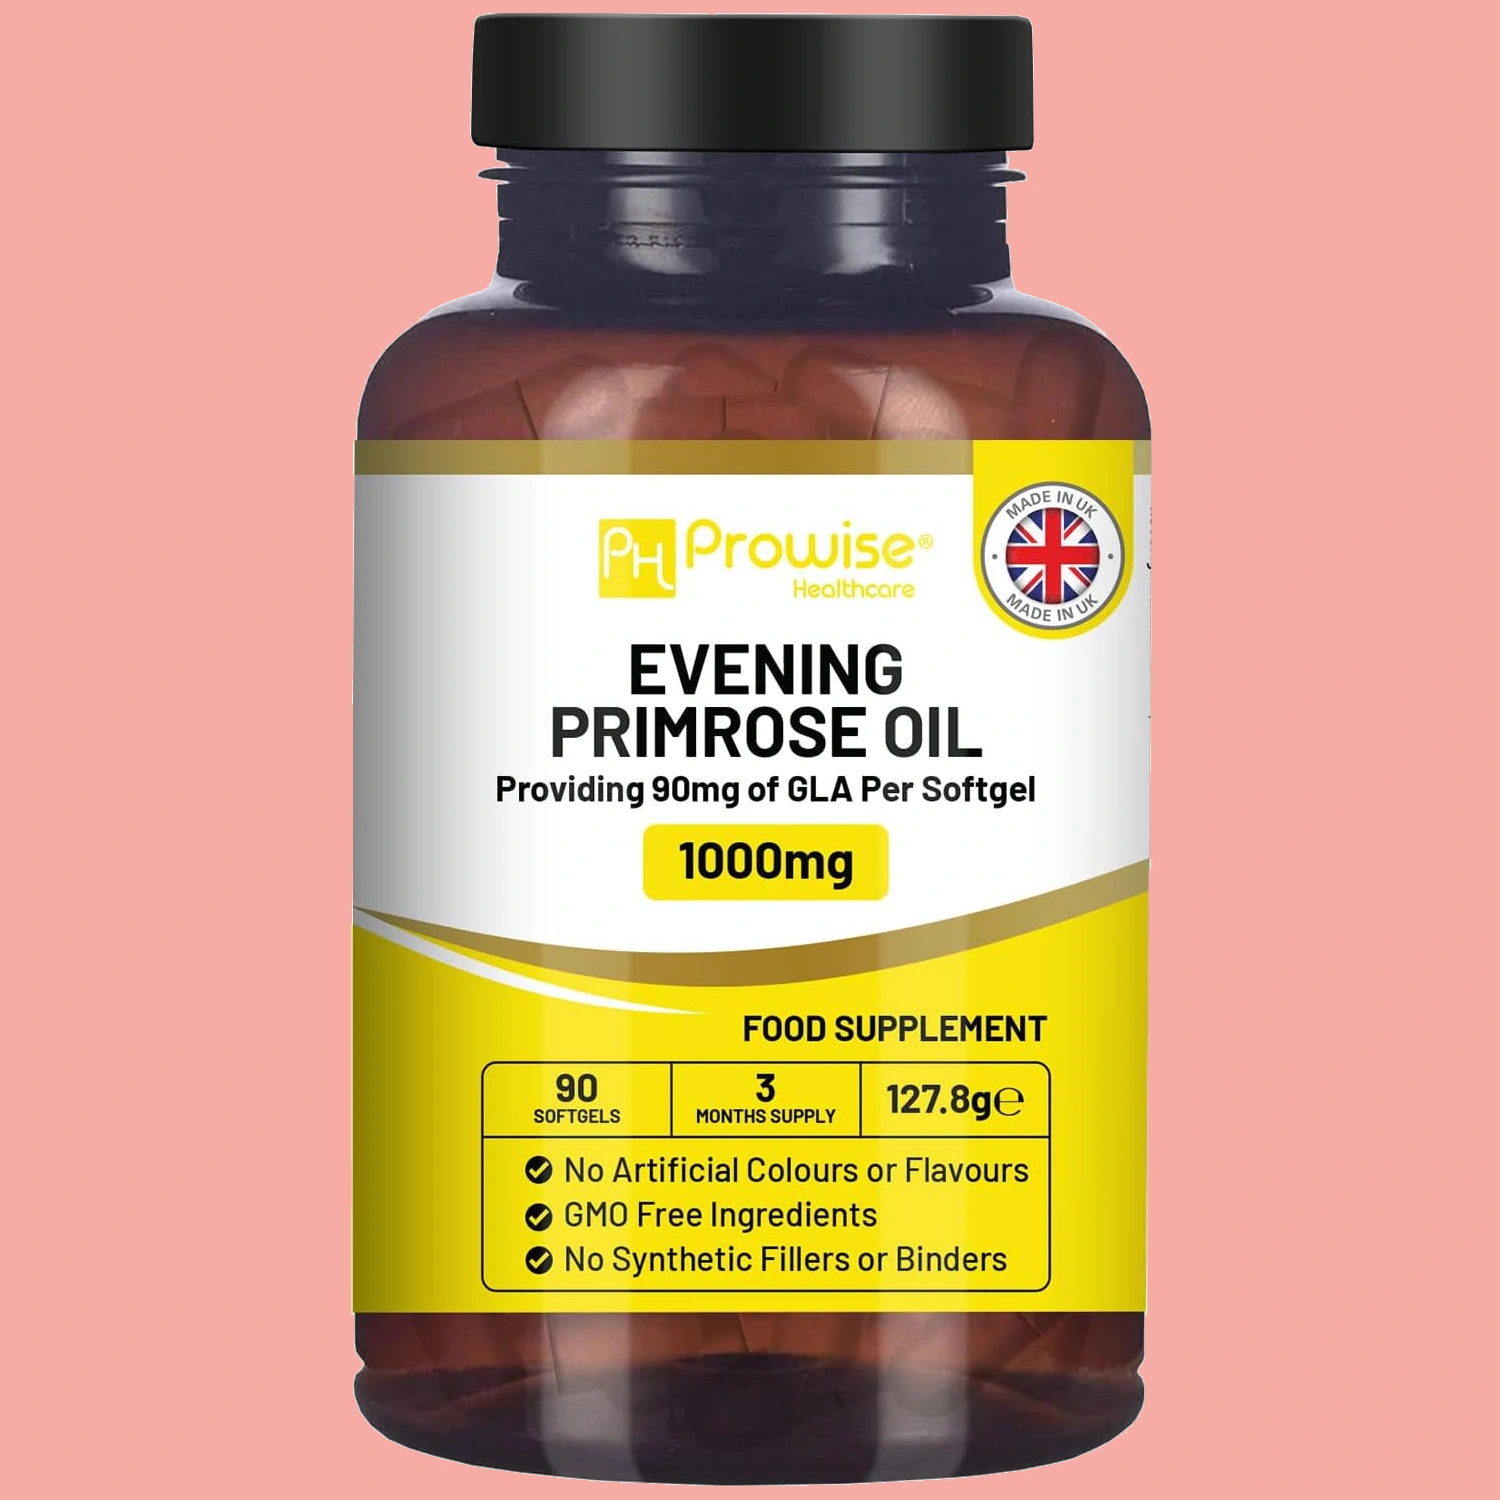 Bottle of Evening Primrose oil capsules displayed on a neutral background, ideal for hormonal acne treatment.